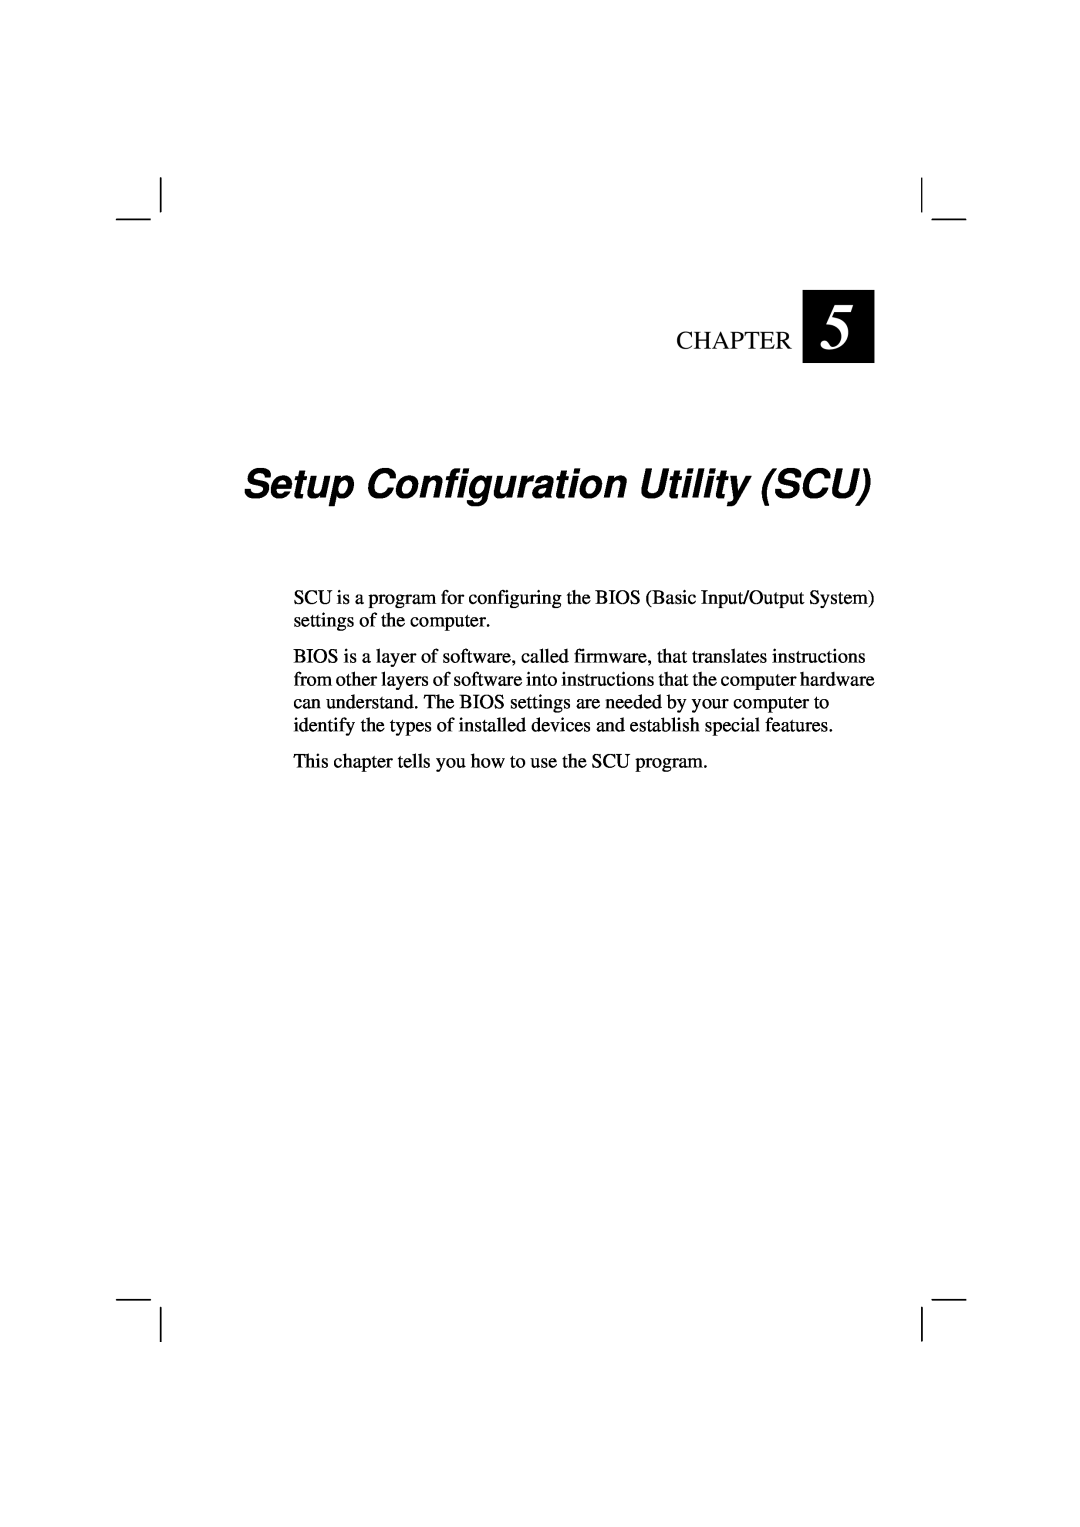 Casio HK1223 owner manual Setup Configuration Utility SCU, Chapter, This chapter tells you how to use the SCU program 